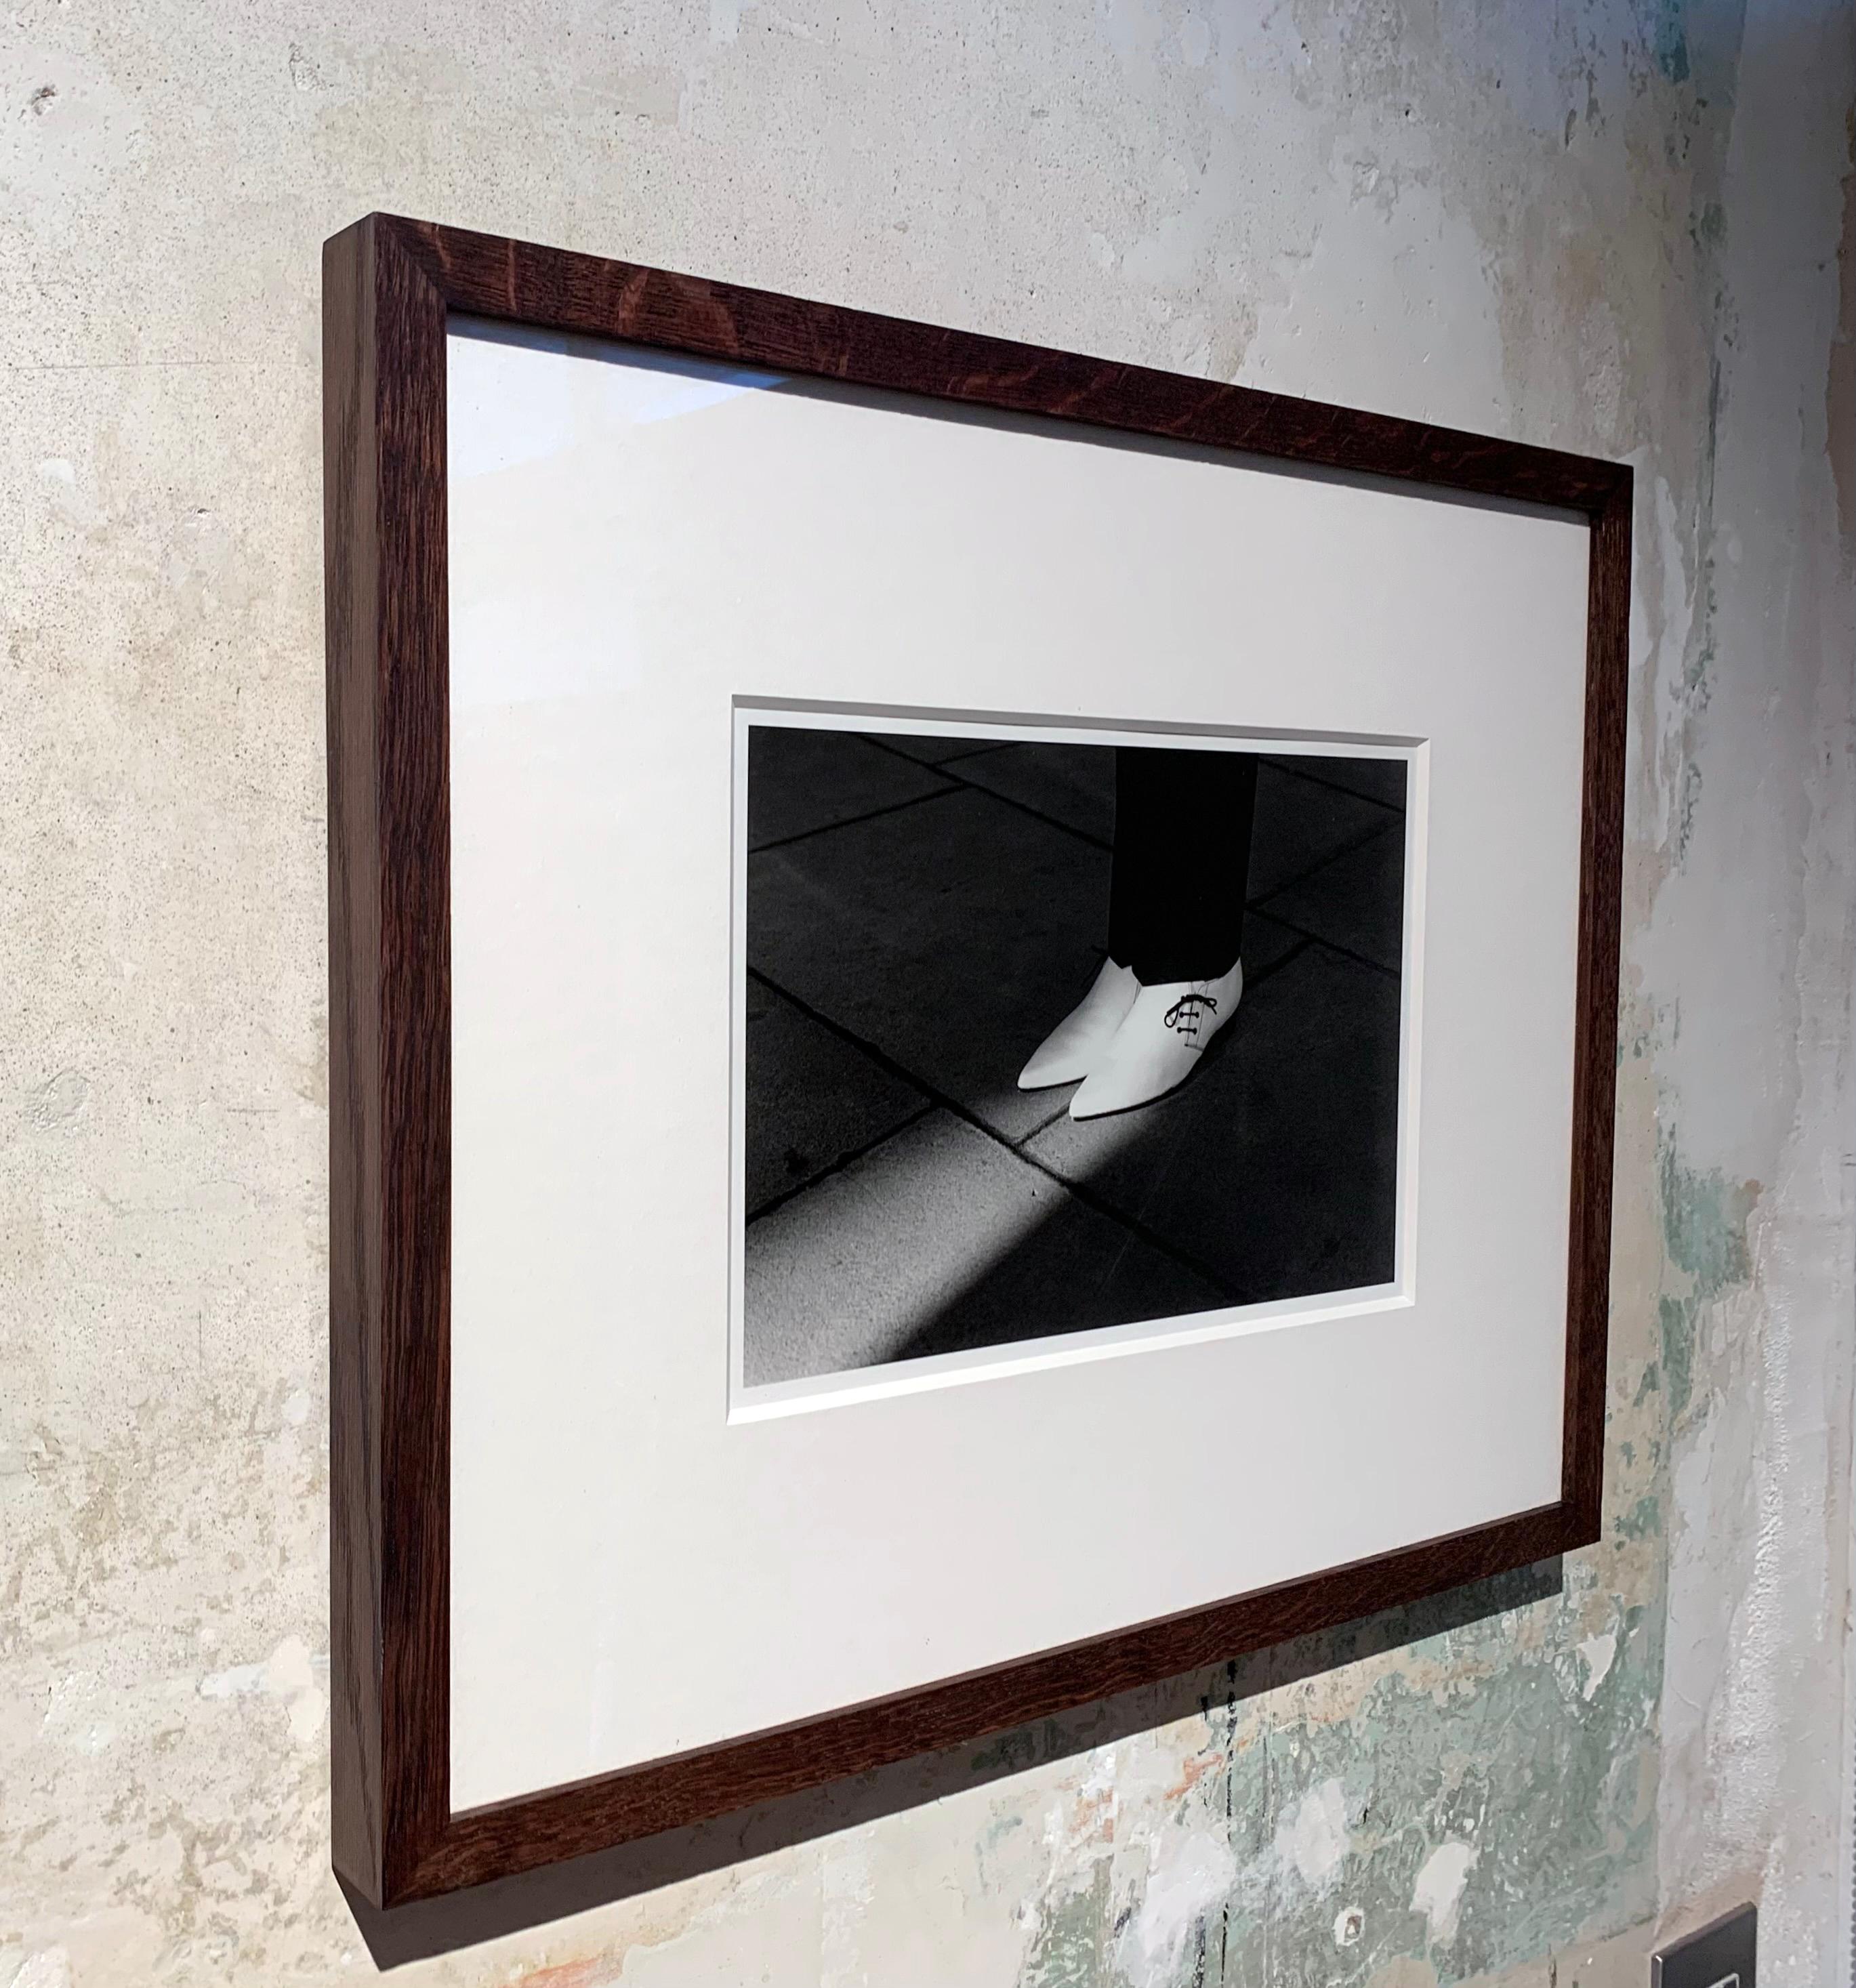 Brian Griffin
Joe Jackson - Look Sharp, 1979
Vintage Gelatin Silver Print, Framed; museum mount board, antireflective art glass, oak frame
Image size; 11 4/5 × 15 7/10 in  30 × 40 cm Frame: 44 x 54 cm

This 1979 photograph was shot for the album